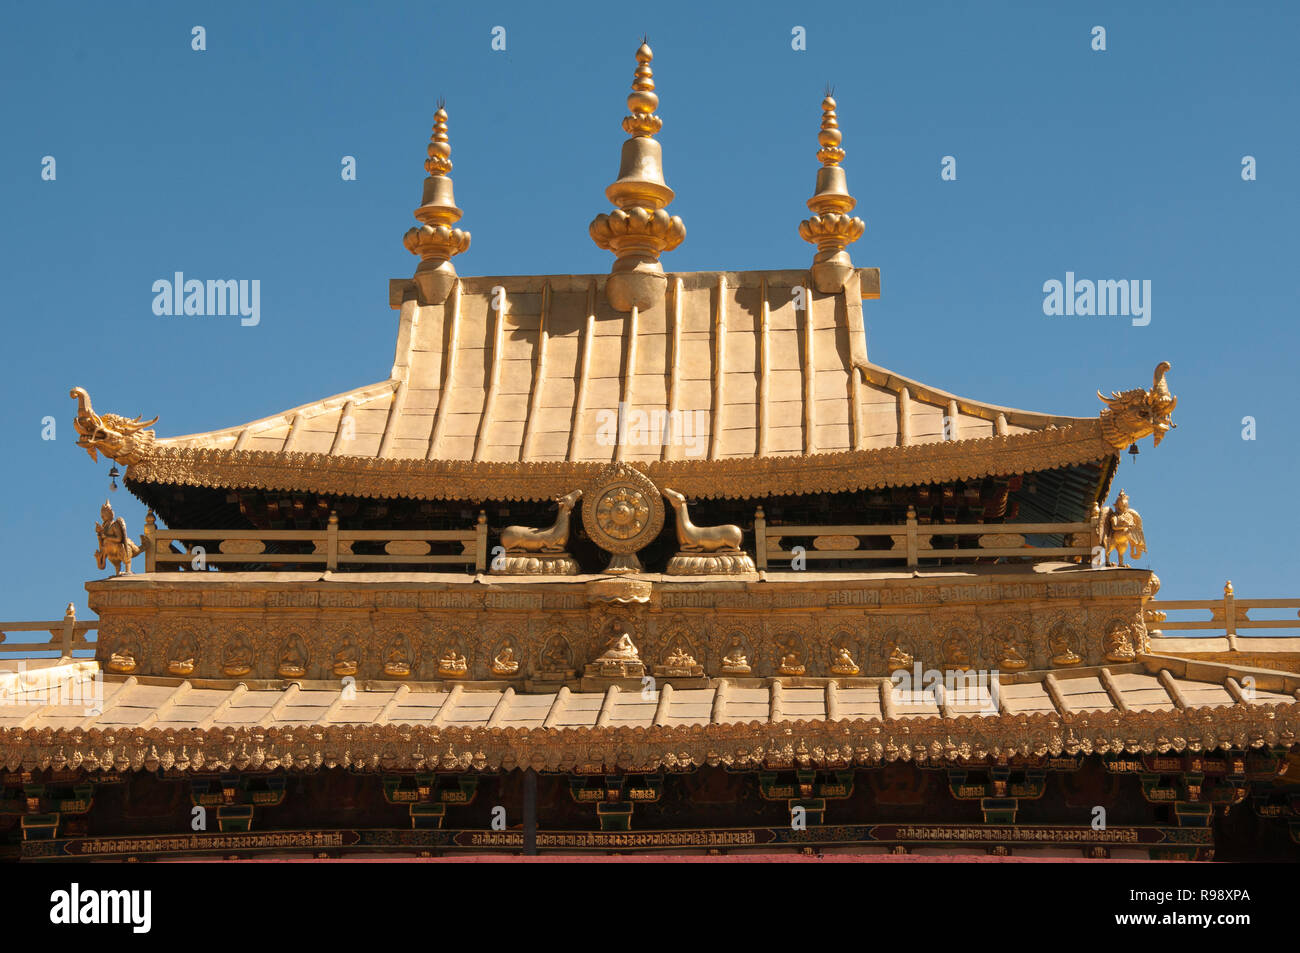 Golden rooftops of the Jokhang Temple on the Barkhor in Lhasa,  the most revered religious structure in Tibet, China.  Founded 7th century AD. Stock Photo